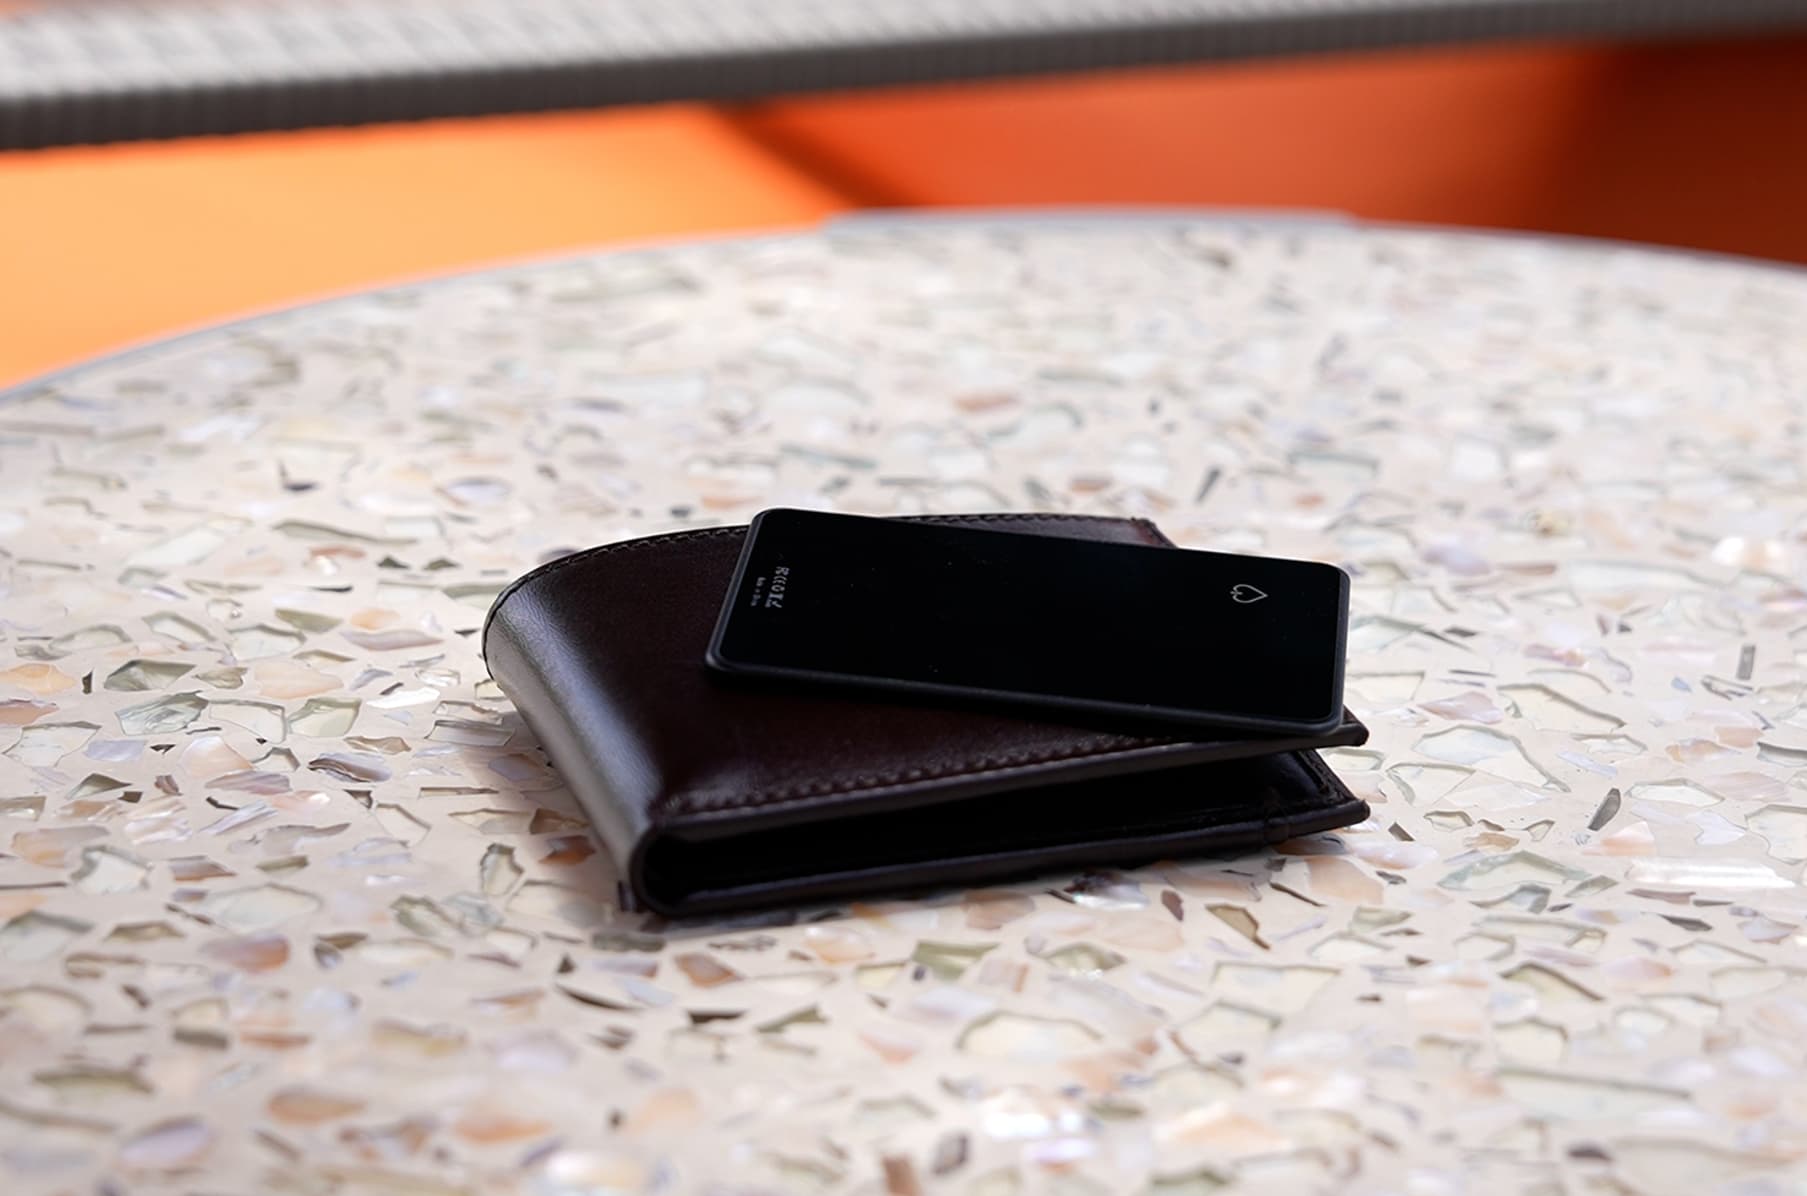 Review: Ace Card smart wallet tracker is super thin and versatile